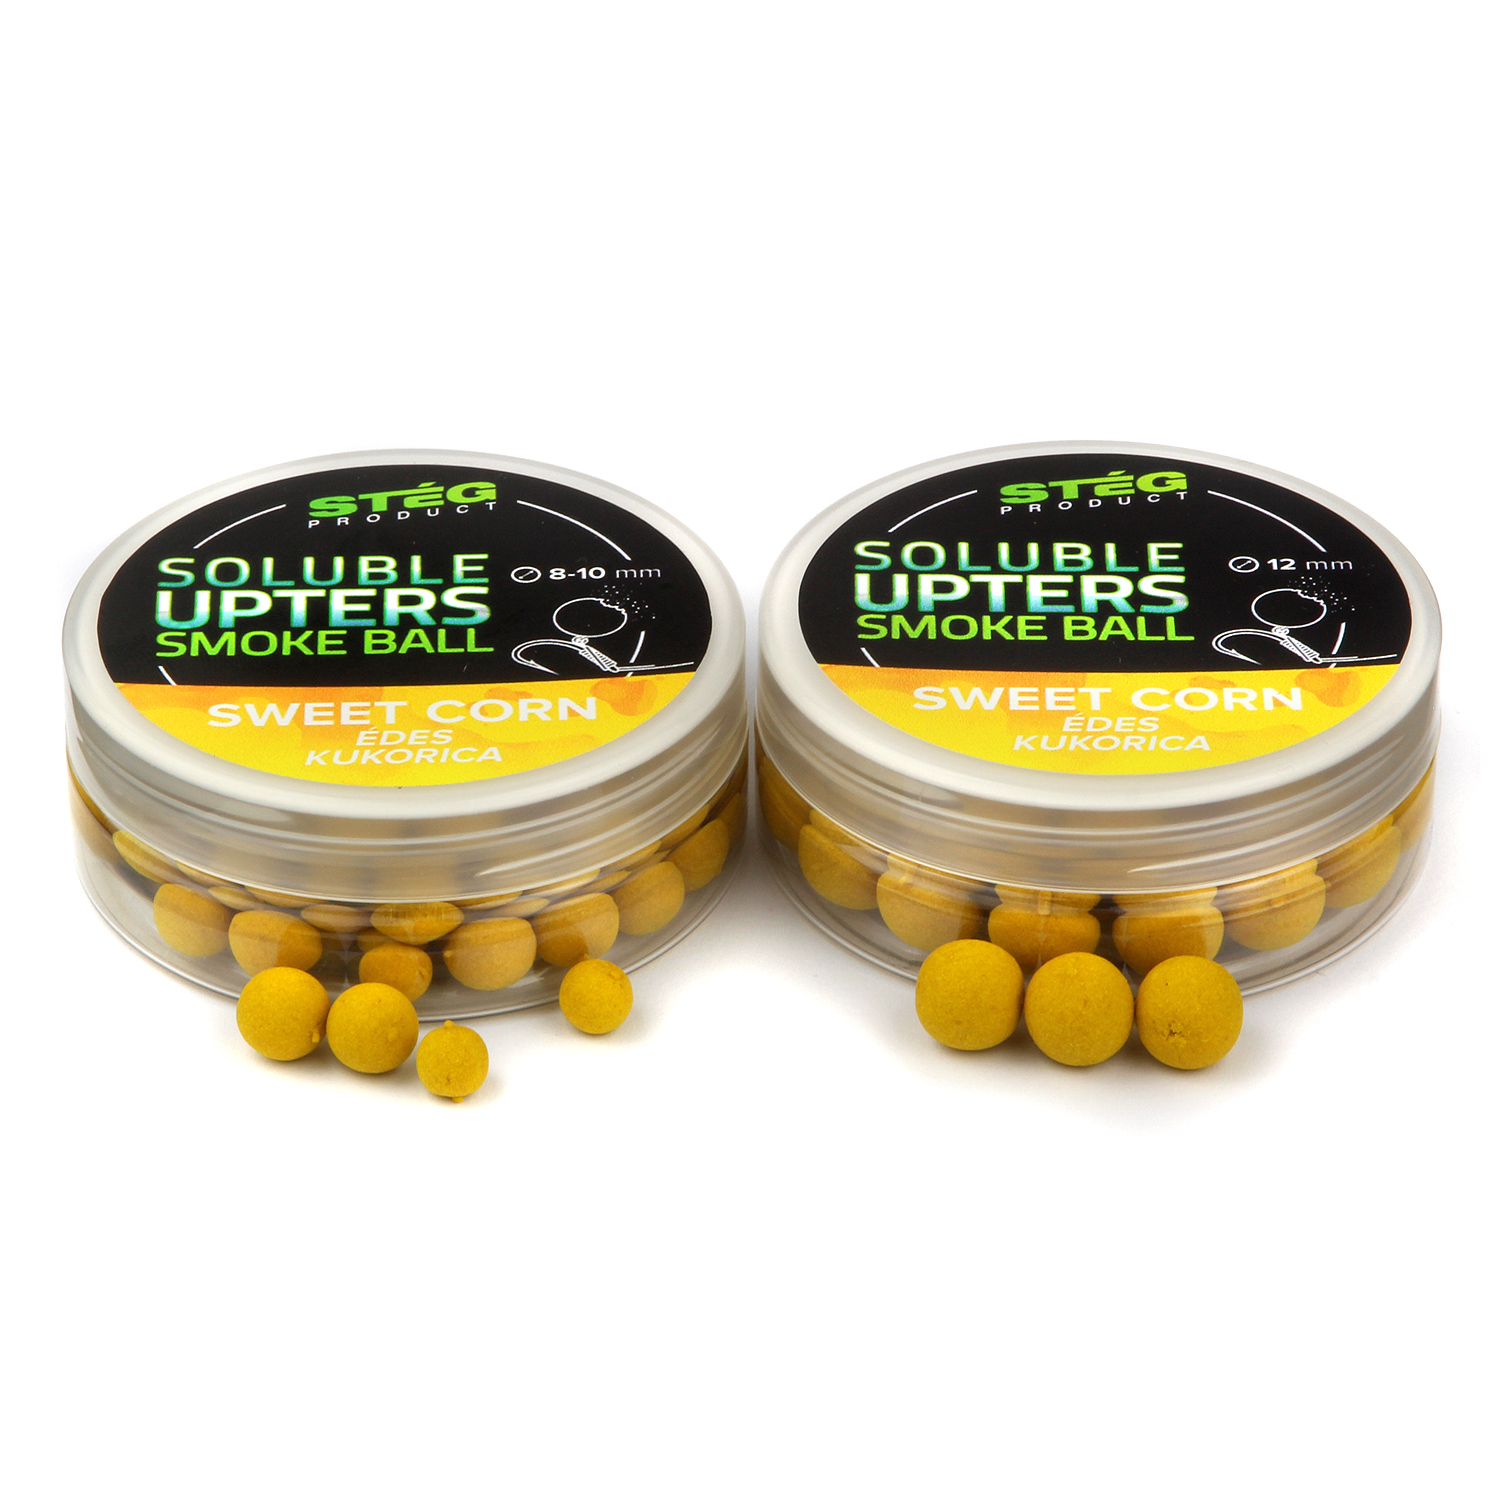 Stg Product Soluble Upters Smoke Ball 12mm Sweet Corn 30g